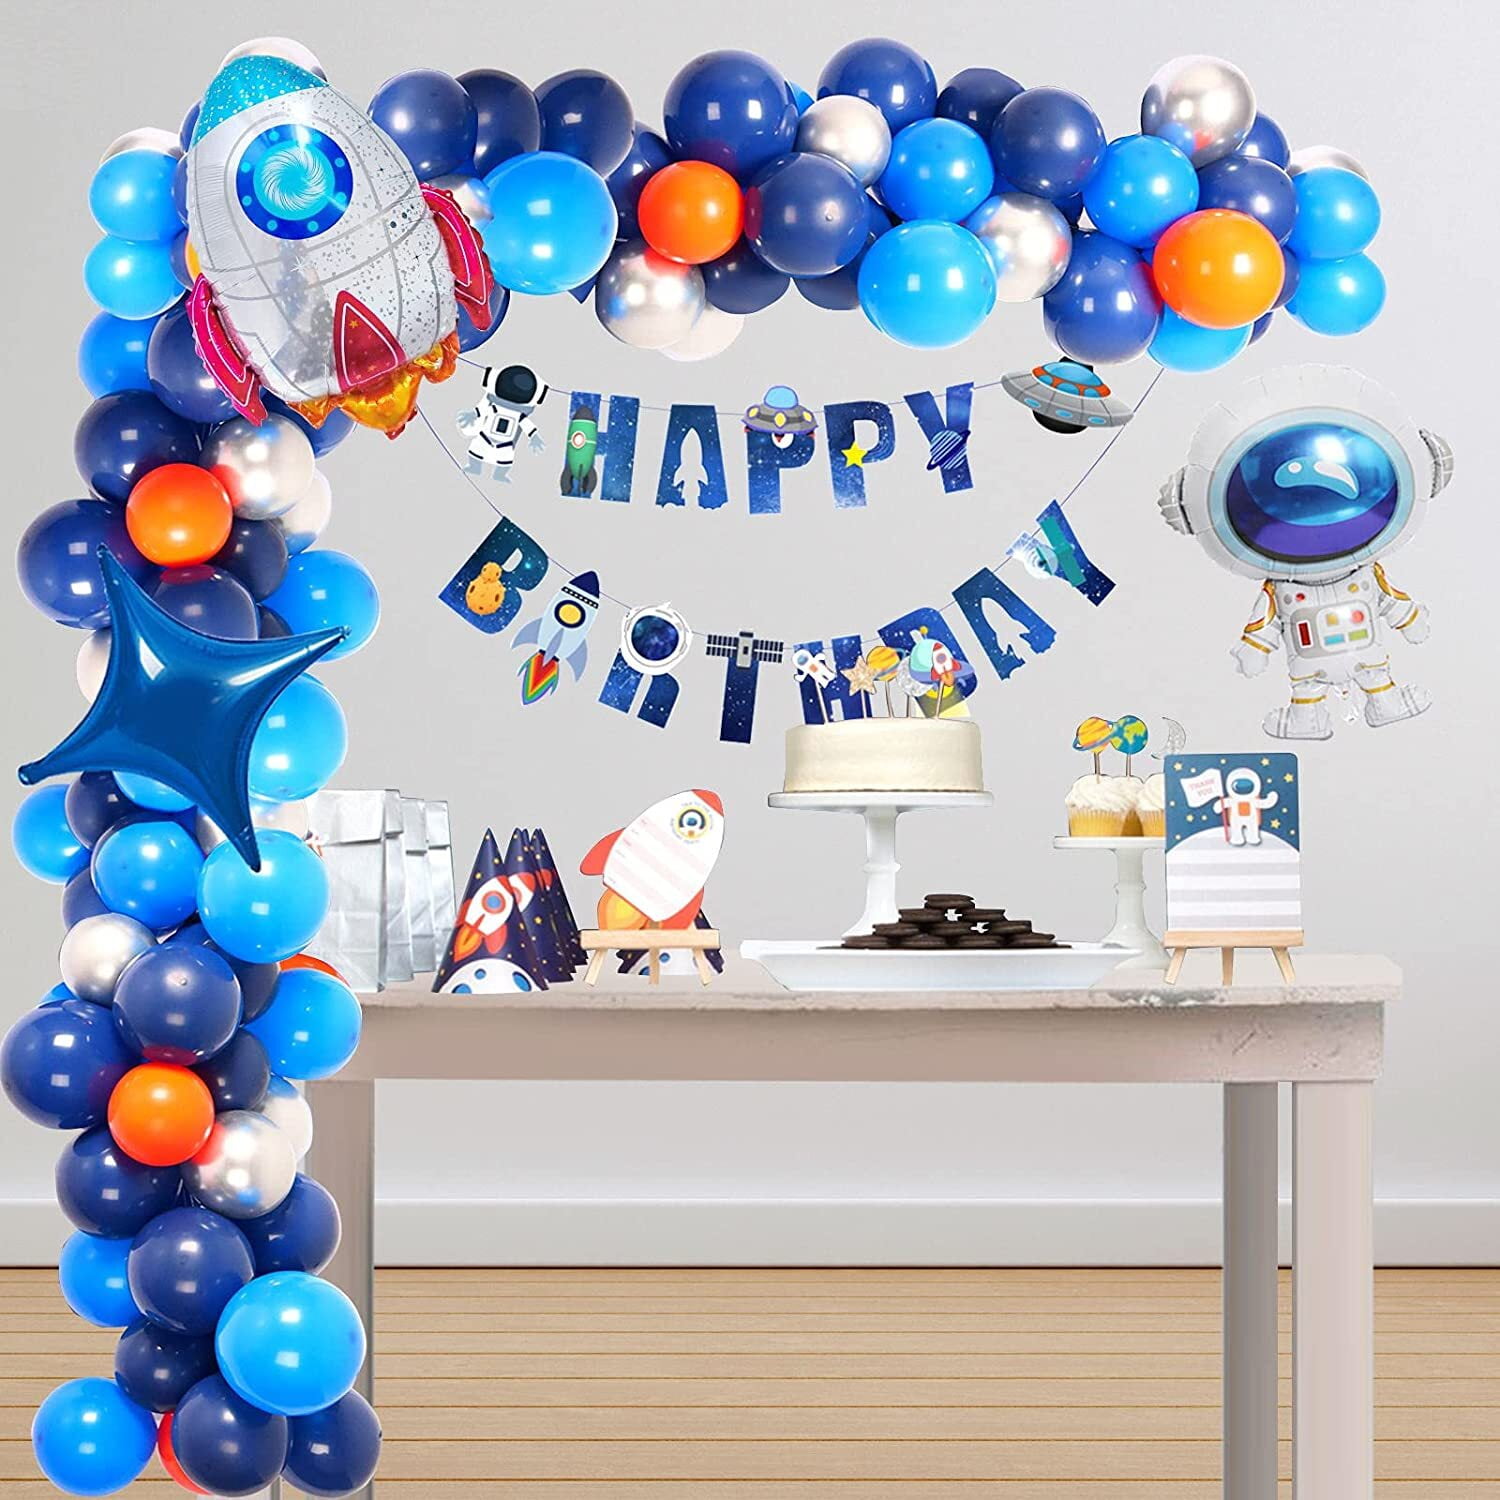 SHOPTIONS HAPPY BIRTHDAY PARTY DECORATION SET WITH SUN & RAINBOW Balloon  (Multicolor, Pack of 56) Price in India - Buy SHOPTIONS HAPPY BIRTHDAY  PARTY DECORATION SET WITH SUN & RAINBOW Balloon (Multicolor